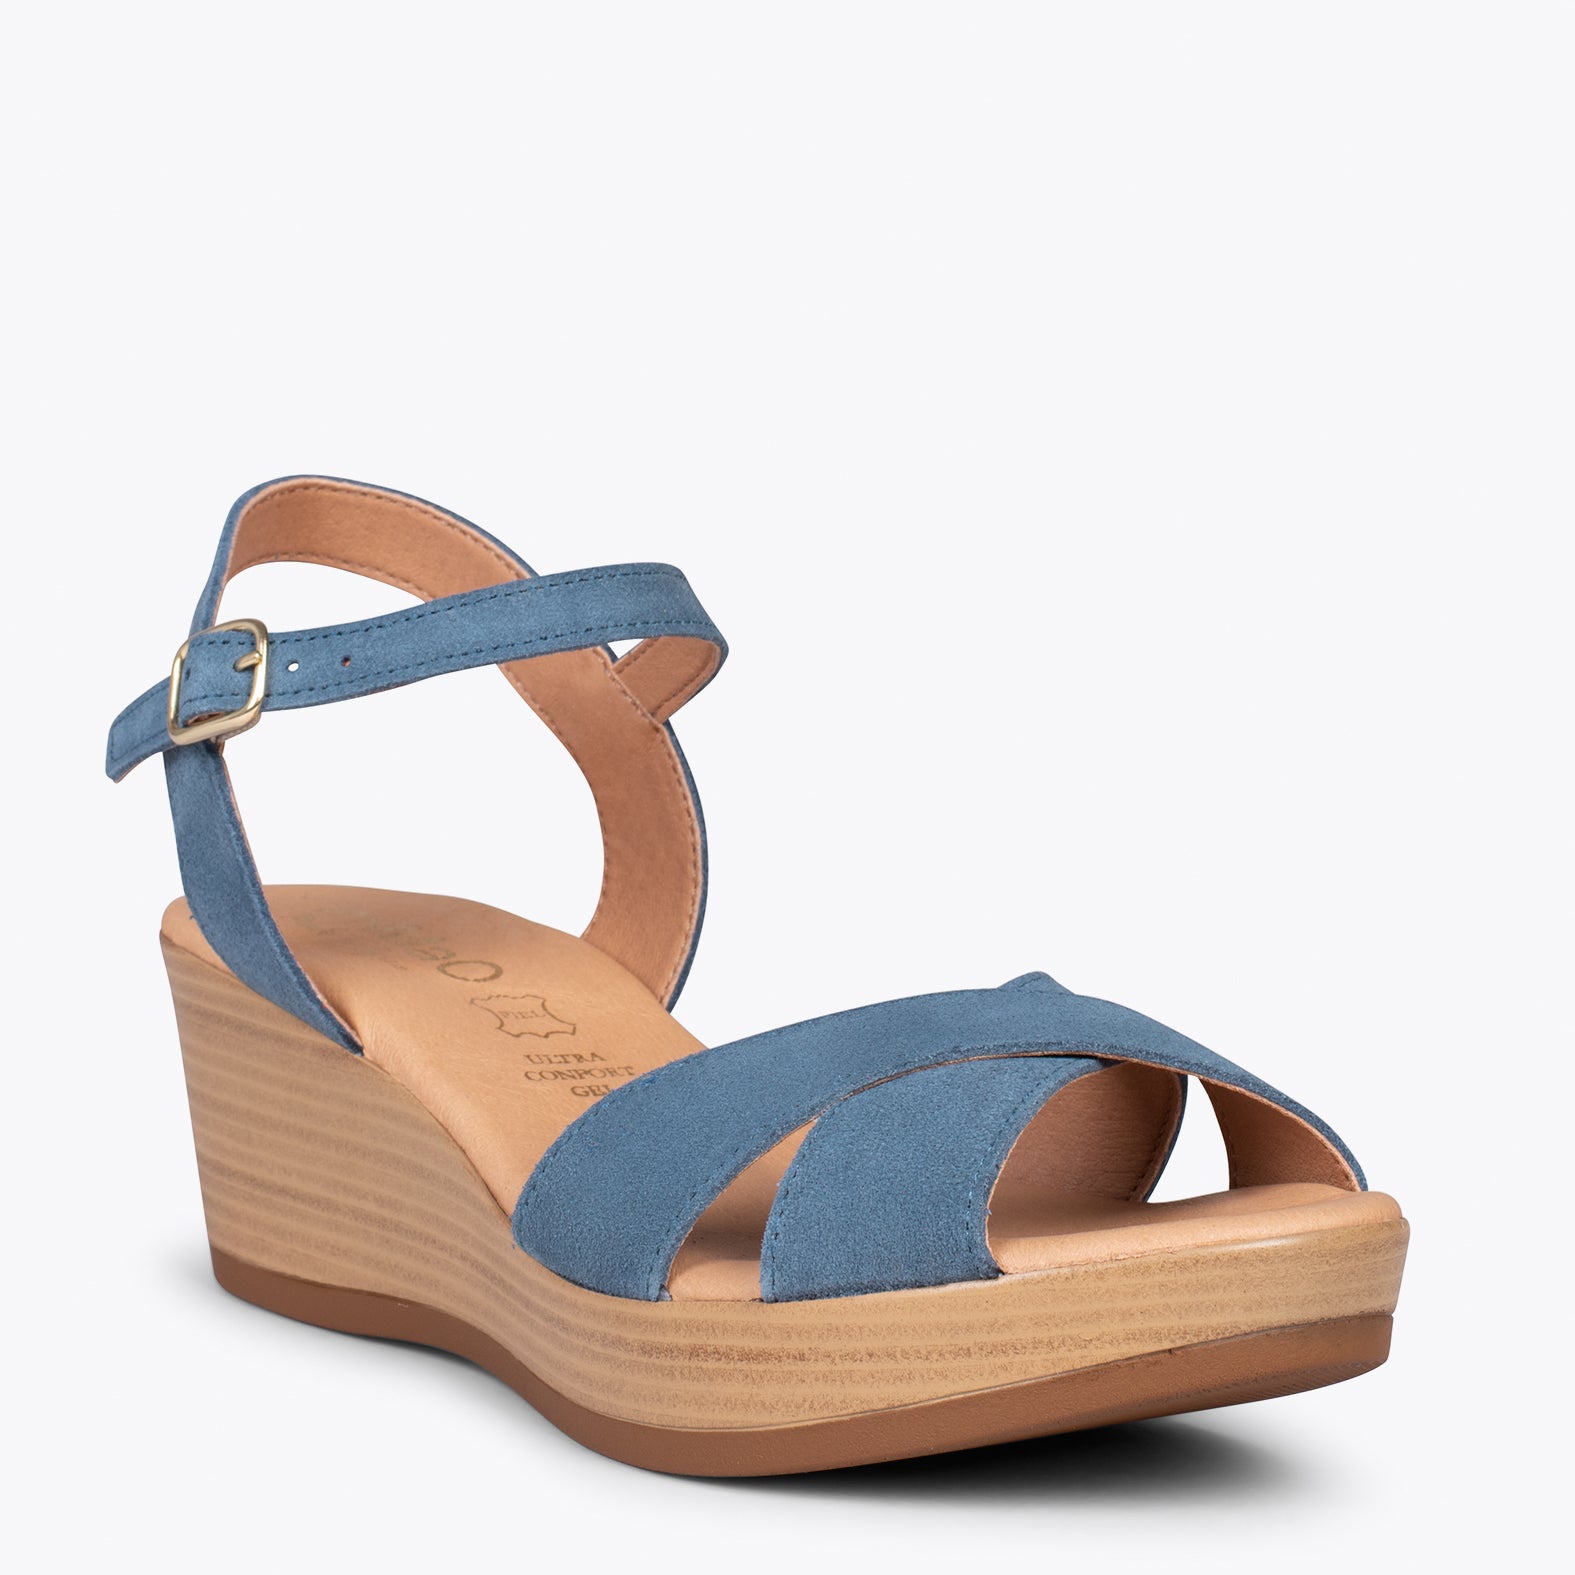 SEA- JEANS comfortable sandal with wedge